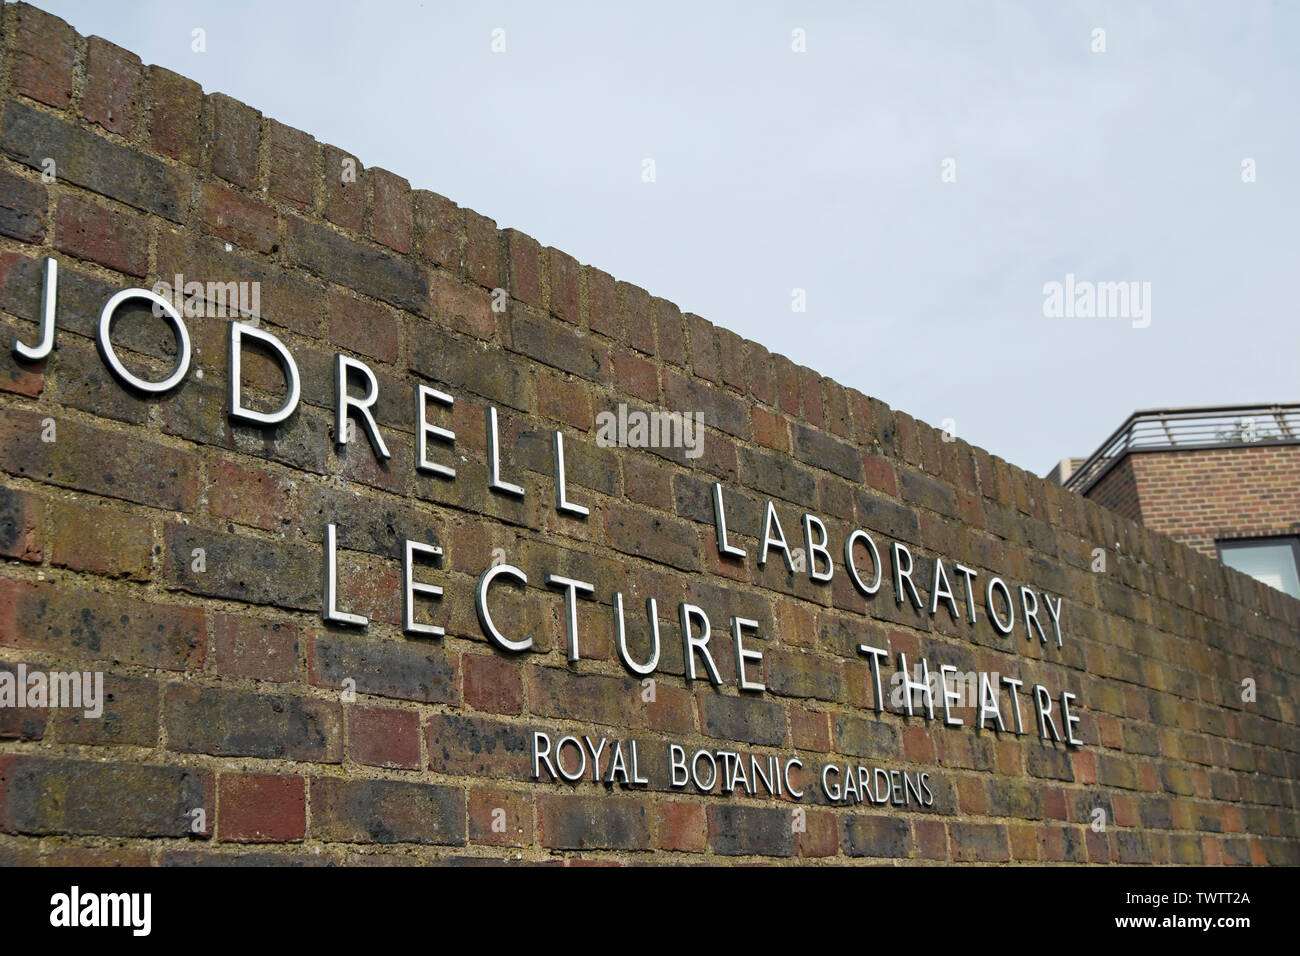 Exterior Wall With Name At The Entrance To Jodrell Laboratory